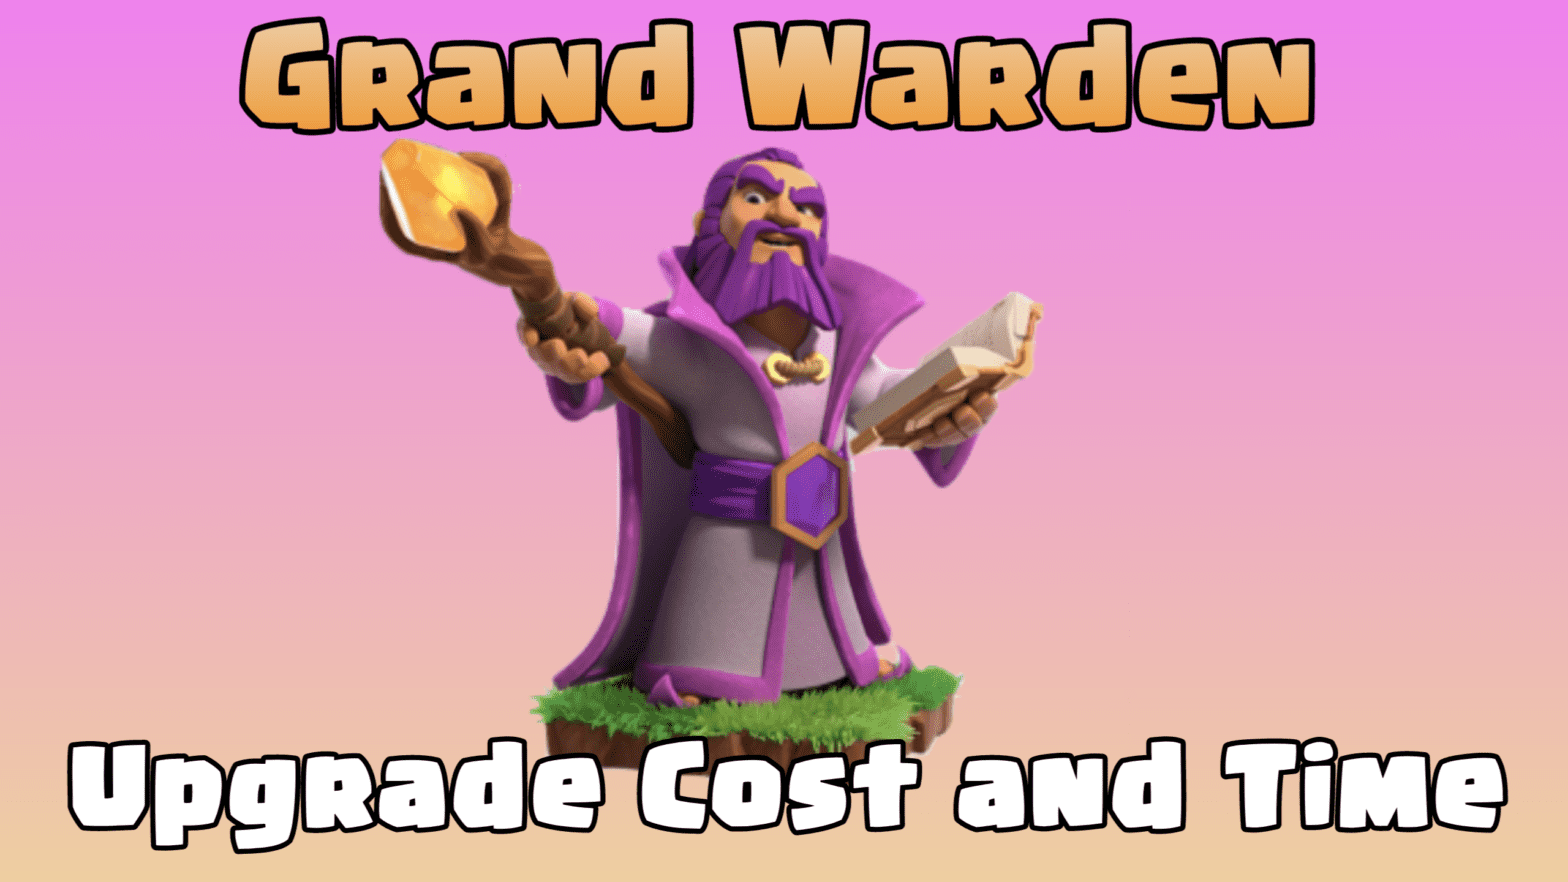 Grand Warden: Max Levels, Upgrade Cost, and Upgrade Time